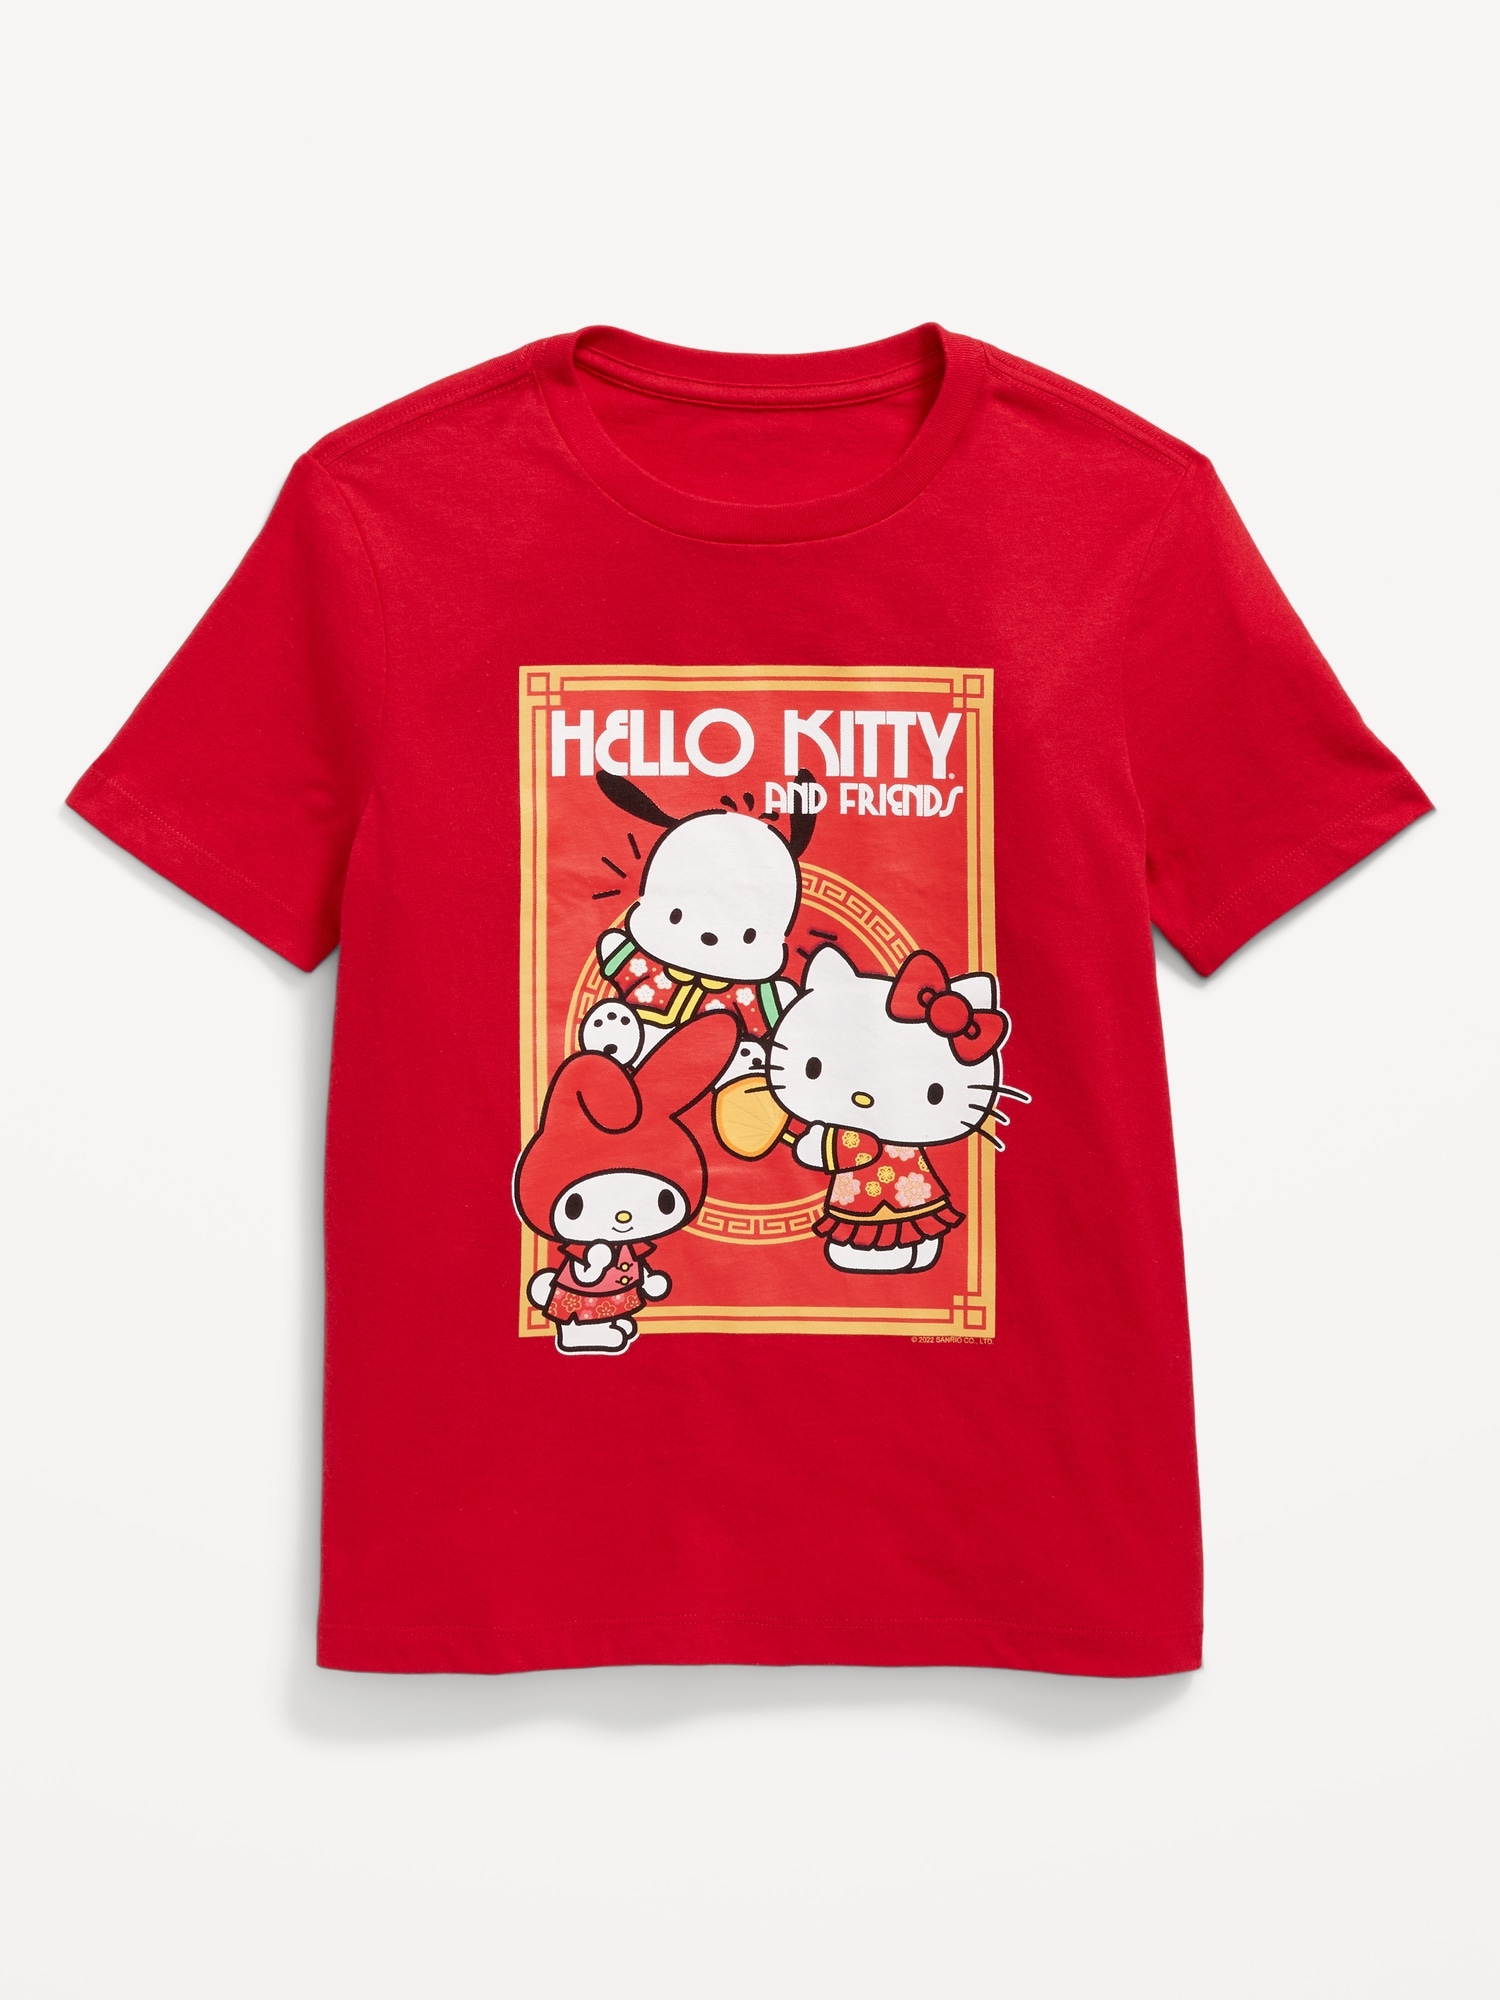 Hello Kitty® & Friends Gender-Neutral T-Shirt for Kids | Old Navy